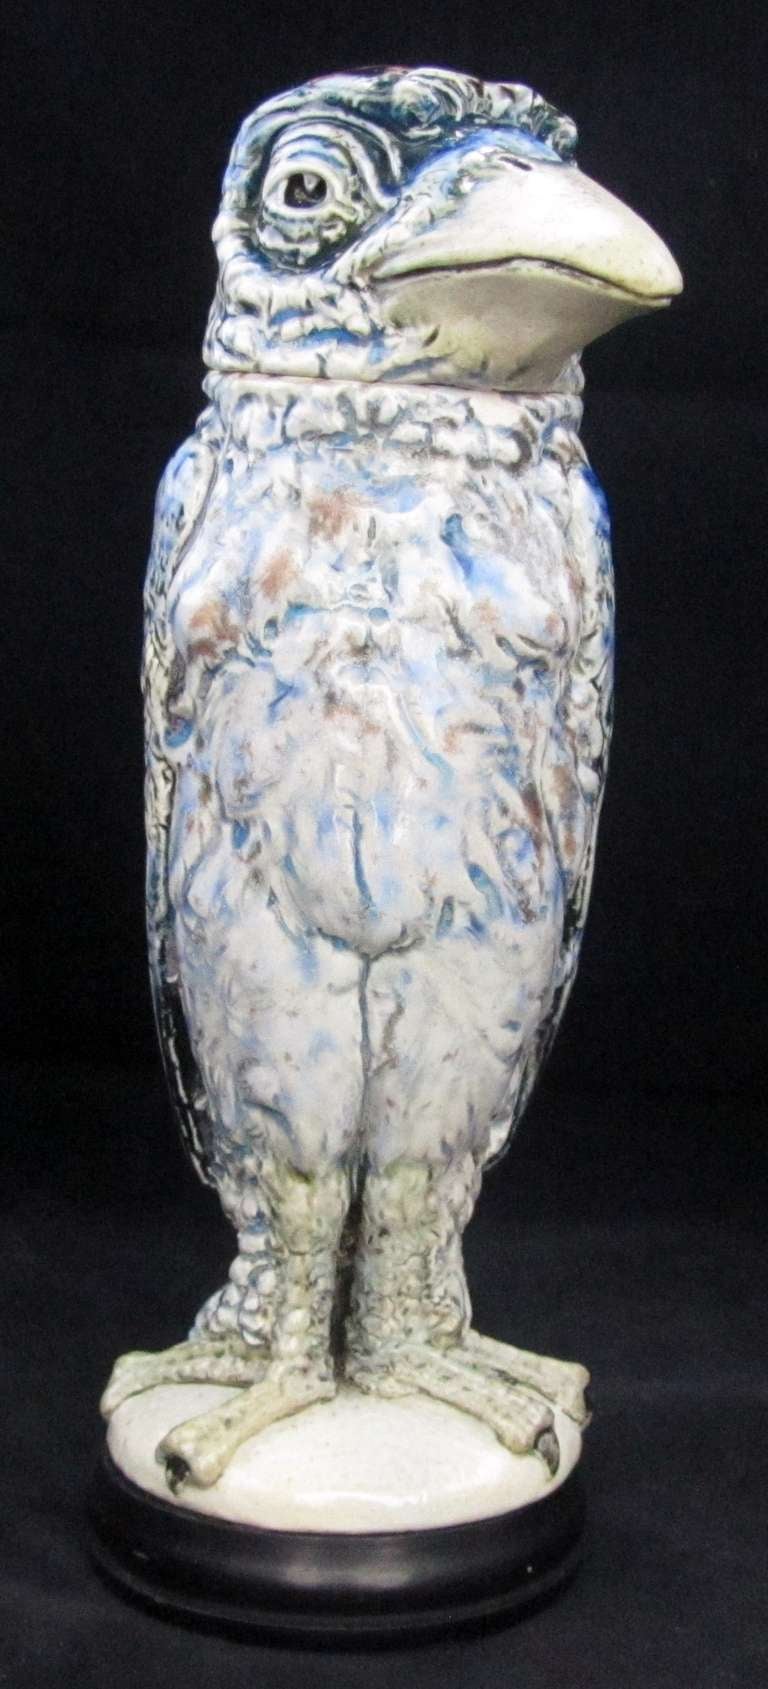 Martin Brothers tabacco jar modeled as a grotesque bird with a blue and aubergine glaze.There is a chip to the collar of the body which is partially obscured by the large beak when the head is in situ.